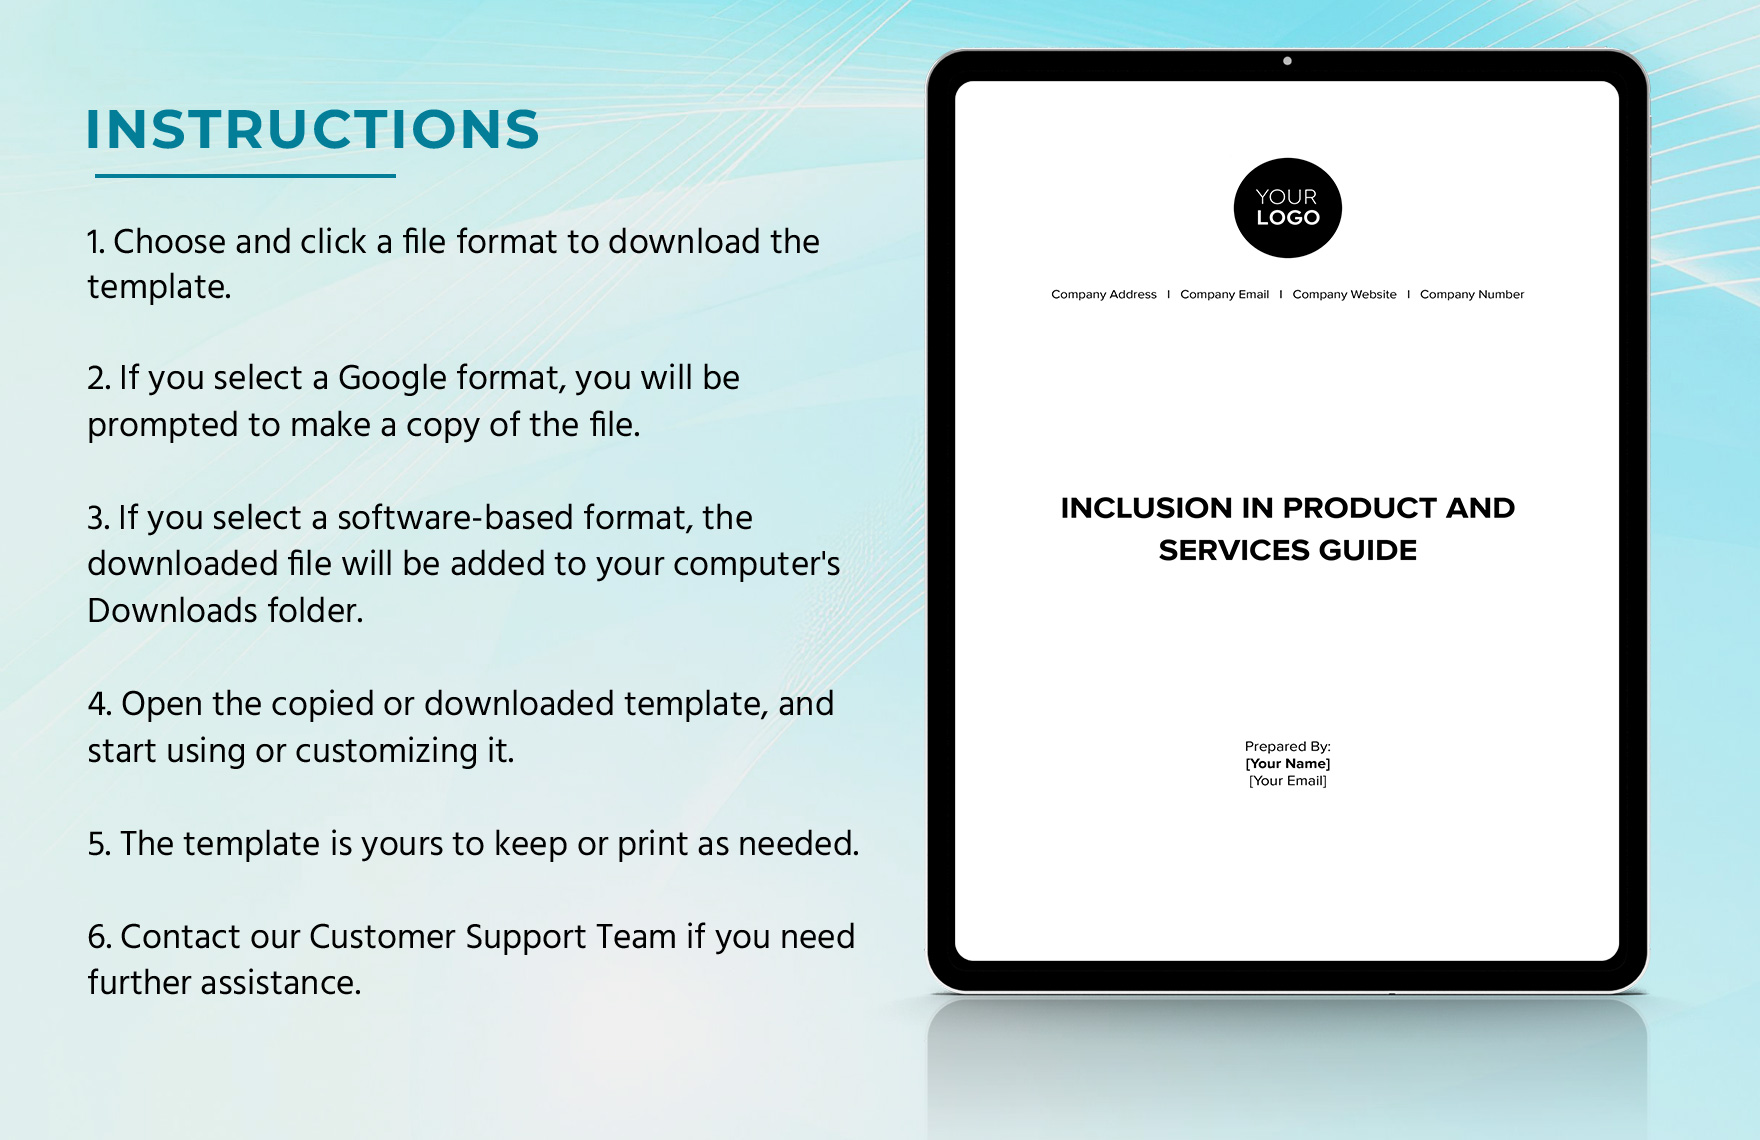 Inclusion in Product and Services Guide HR Template